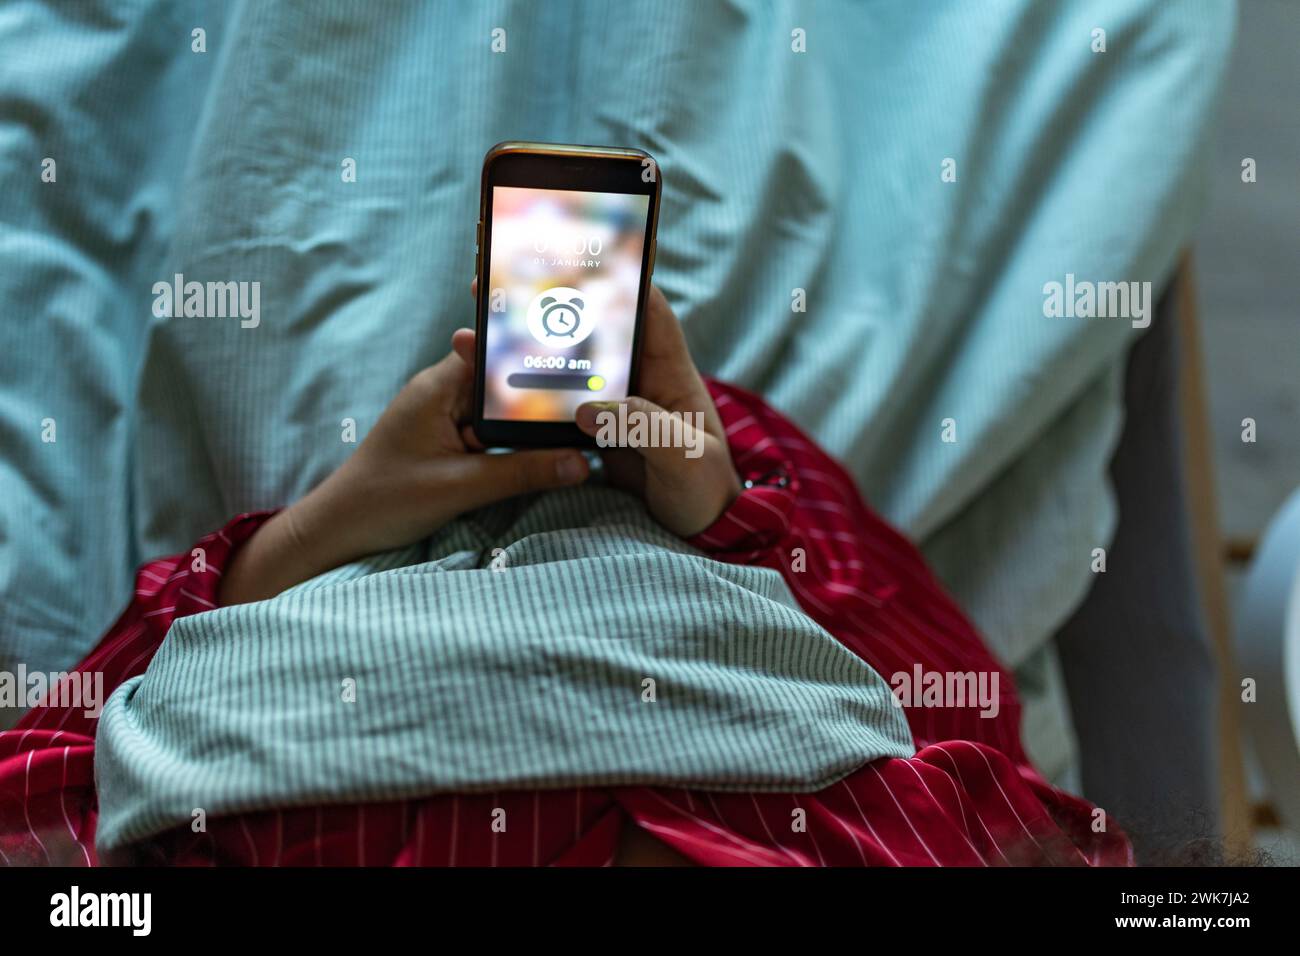 Woman setting alarm before going to sleep in the evening. Concept of sleep routine. Insomnia a sleep problems among adults. Stock Photo